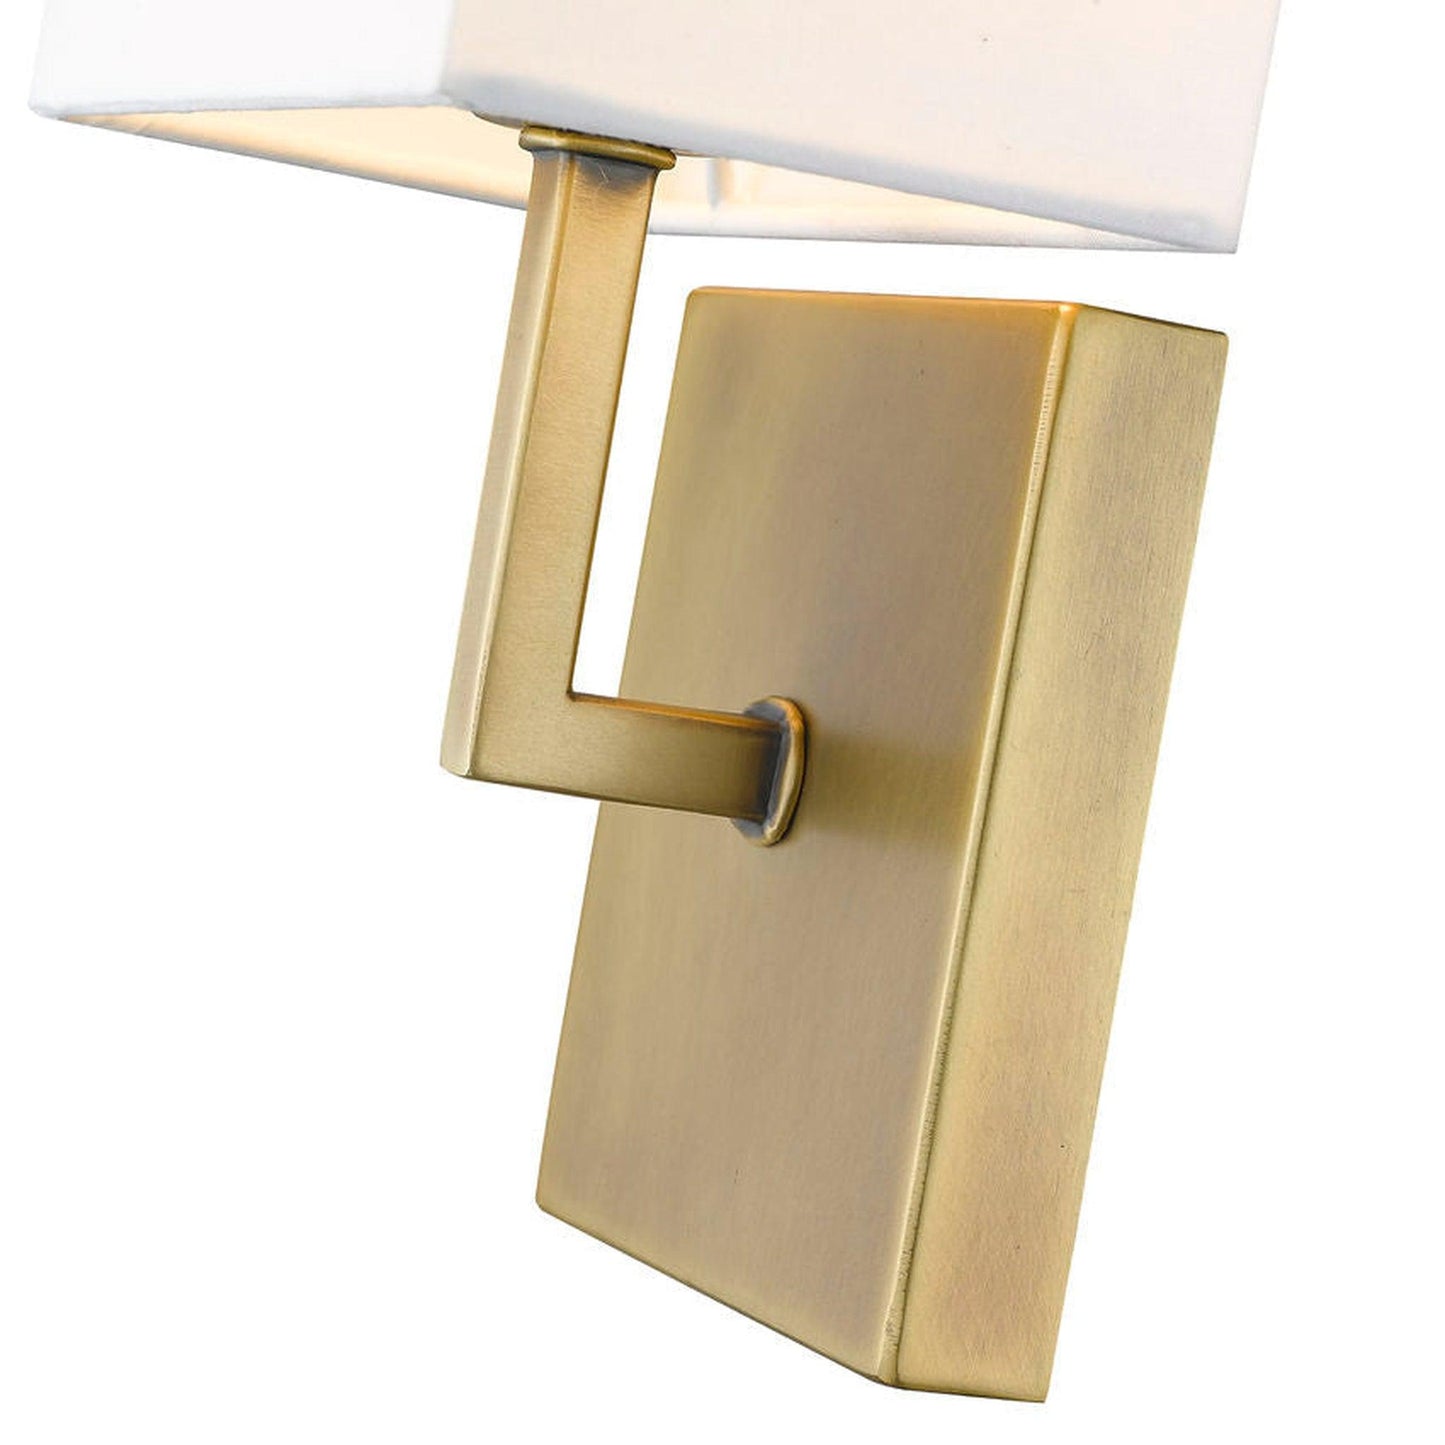 Z-Lite Saxon 7" 1-Light Rubbed Brass Wall Sconce With White Fabric Shade